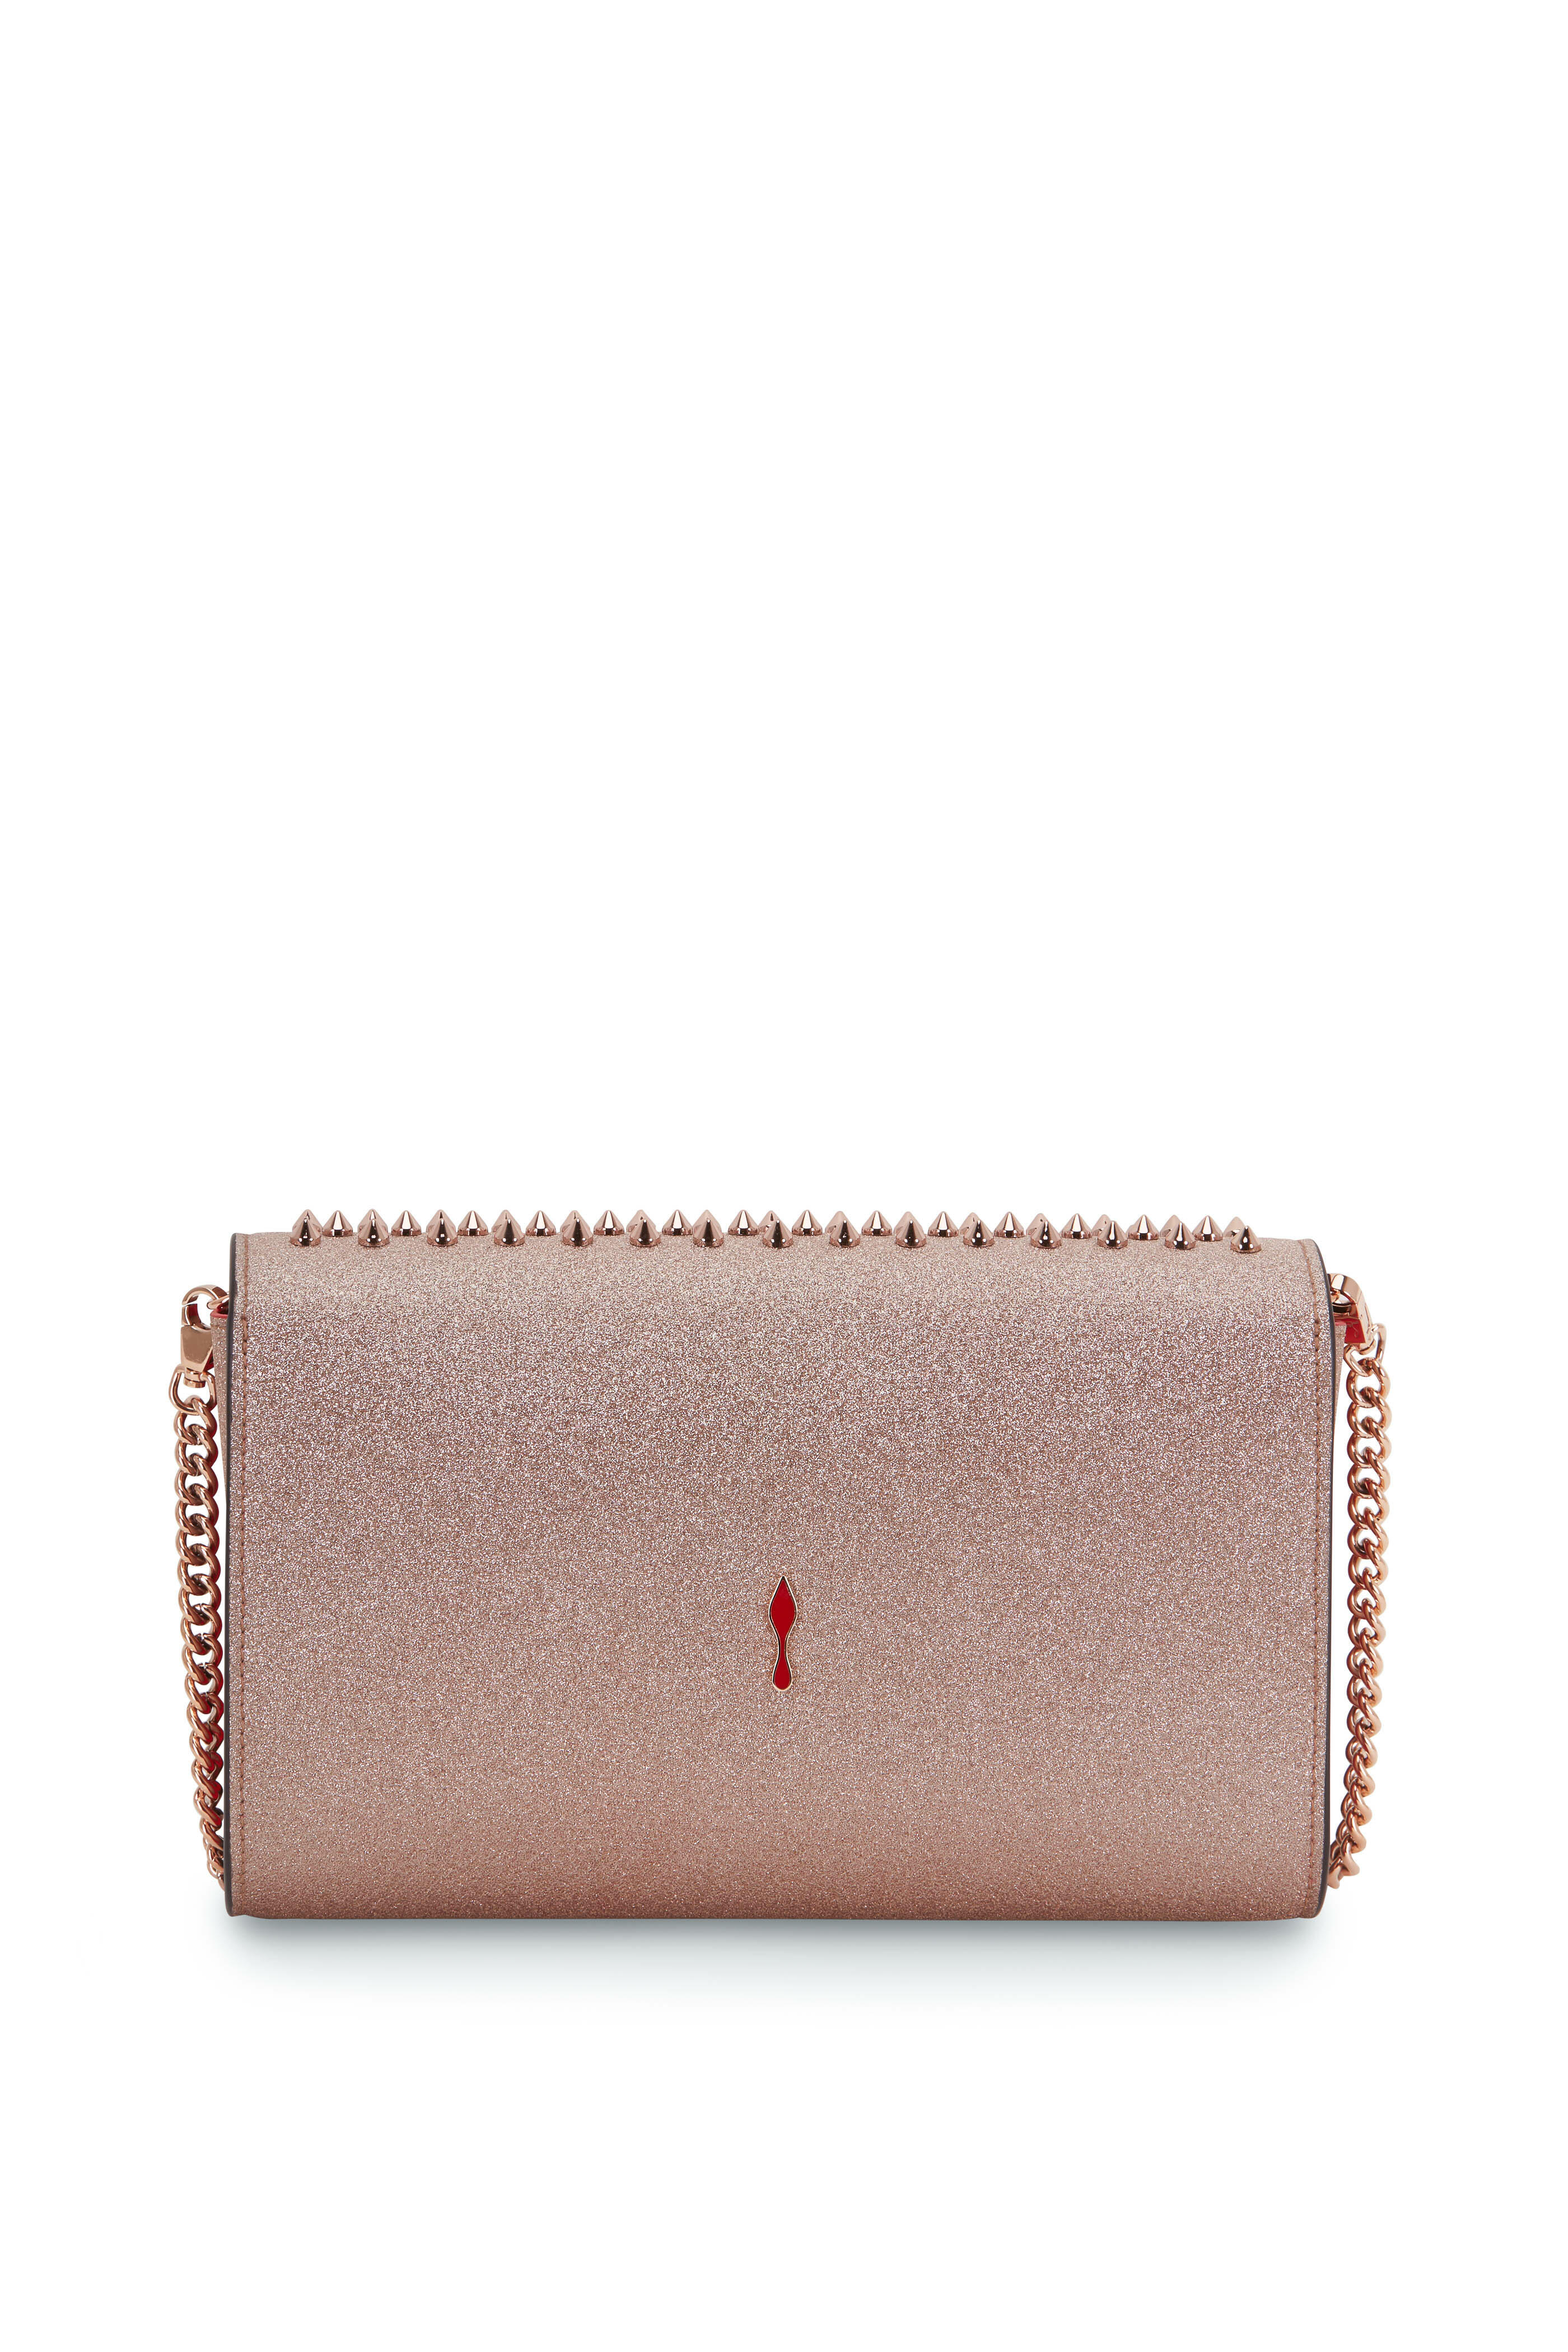 Christian Louboutin Clutch Paloma Spiked Pink Leather Shoulder Bag -  MyDesignerly